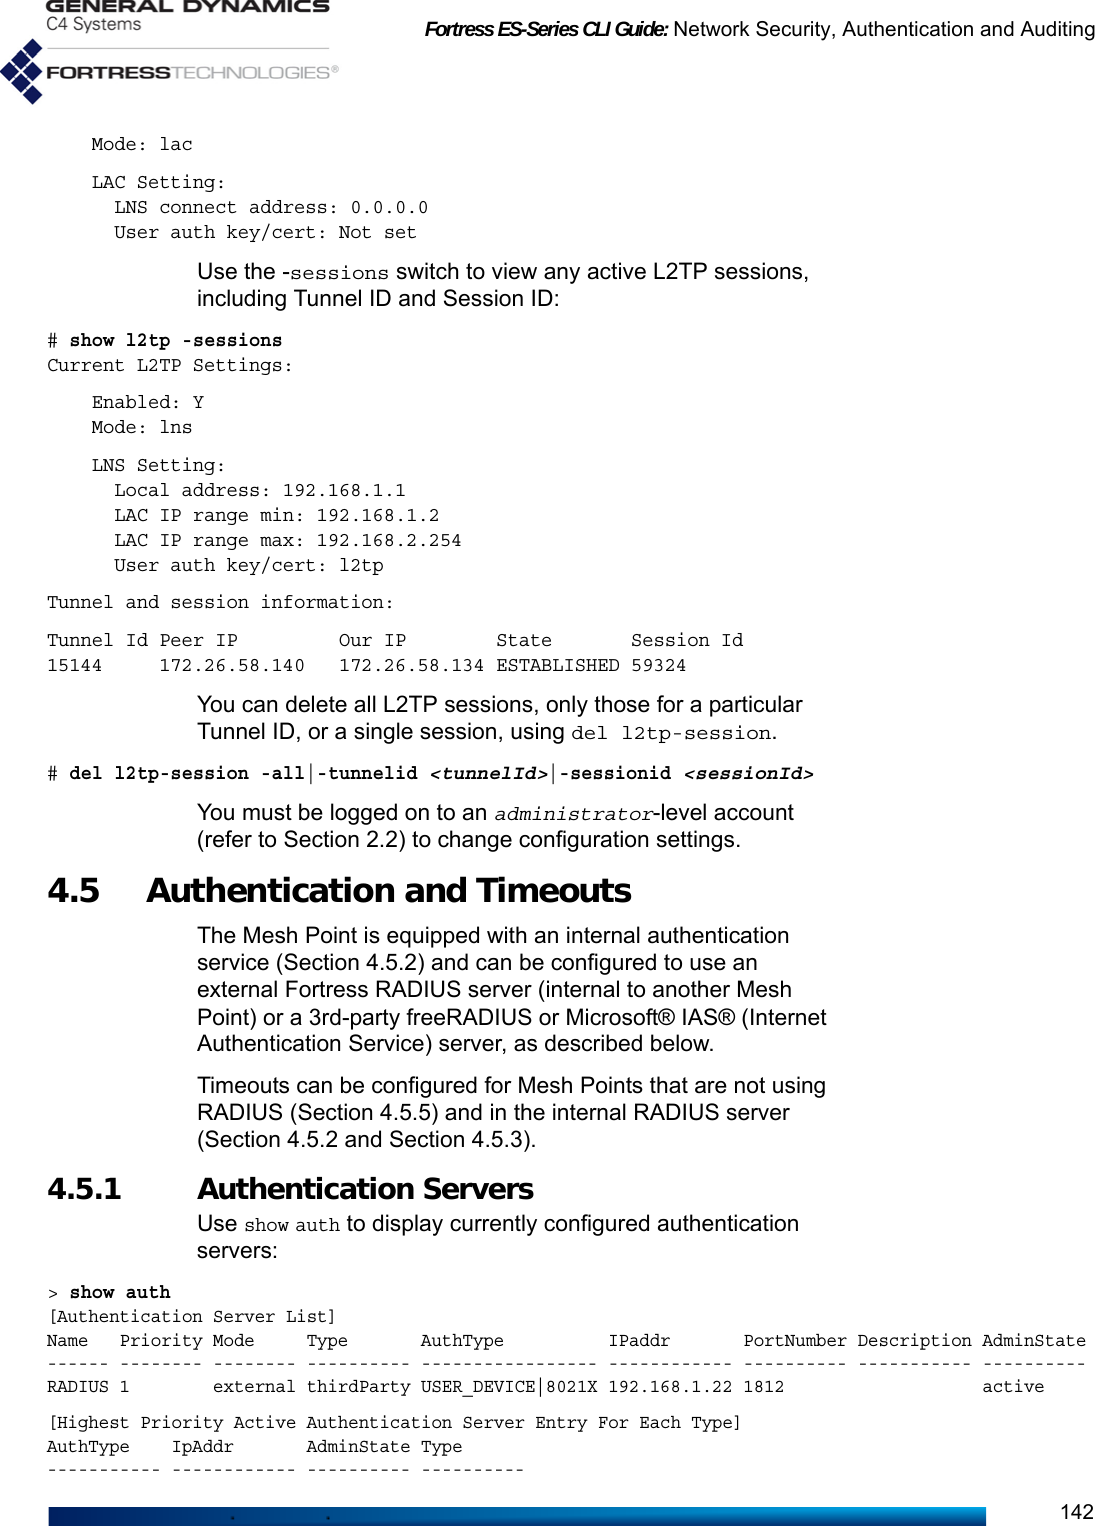 Fortress ES-Series CLI Guide: Network Security, Authentication and Auditing142    Mode: lac    LAC Setting:      LNS connect address: 0.0.0.0      User auth key/cert: Not setUse the -sessions switch to view any active L2TP sessions, including Tunnel ID and Session ID:# show l2tp -sessionsCurrent L2TP Settings:    Enabled: Y    Mode: lns    LNS Setting:      Local address: 192.168.1.1      LAC IP range min: 192.168.1.2      LAC IP range max: 192.168.2.254      User auth key/cert: l2tpTunnel and session information:Tunnel Id Peer IP         Our IP        State       Session Id15144     172.26.58.140   172.26.58.134 ESTABLISHED 59324You can delete all L2TP sessions, only those for a particular Tunnel ID, or a single session, using del l2tp-session.    # del l2tp-session -all|-tunnelid &lt;tunnelId&gt;|-sessionid &lt;sessionId&gt;You must be logged on to an administrator-level account (refer to Section 2.2) to change configuration settings. 4.5  Authentication and Timeouts The Mesh Point is equipped with an internal authentication service (Section 4.5.2) and can be configured to use an external Fortress RADIUS server (internal to another Mesh Point) or a 3rd-party freeRADIUS or Microsoft® IAS® (Internet Authentication Service) server, as described below.Timeouts can be configured for Mesh Points that are not using RADIUS (Section 4.5.5) and in the internal RADIUS server (Section 4.5.2 and Section 4.5.3).4.5.1 Authentication Servers Use show auth to display currently configured authentication servers:&gt; show auth[Authentication Server List]Name   Priority Mode     Type       AuthType          IPaddr       PortNumber Description AdminState------ -------- -------- ---------- ----------------- ------------ ---------- ----------- ----------RADIUS 1        external thirdParty USER_DEVICE|8021X 192.168.1.22 1812                   active[Highest Priority Active Authentication Server Entry For Each Type]AuthType    IpAddr       AdminState Type----------- ------------ ---------- ----------